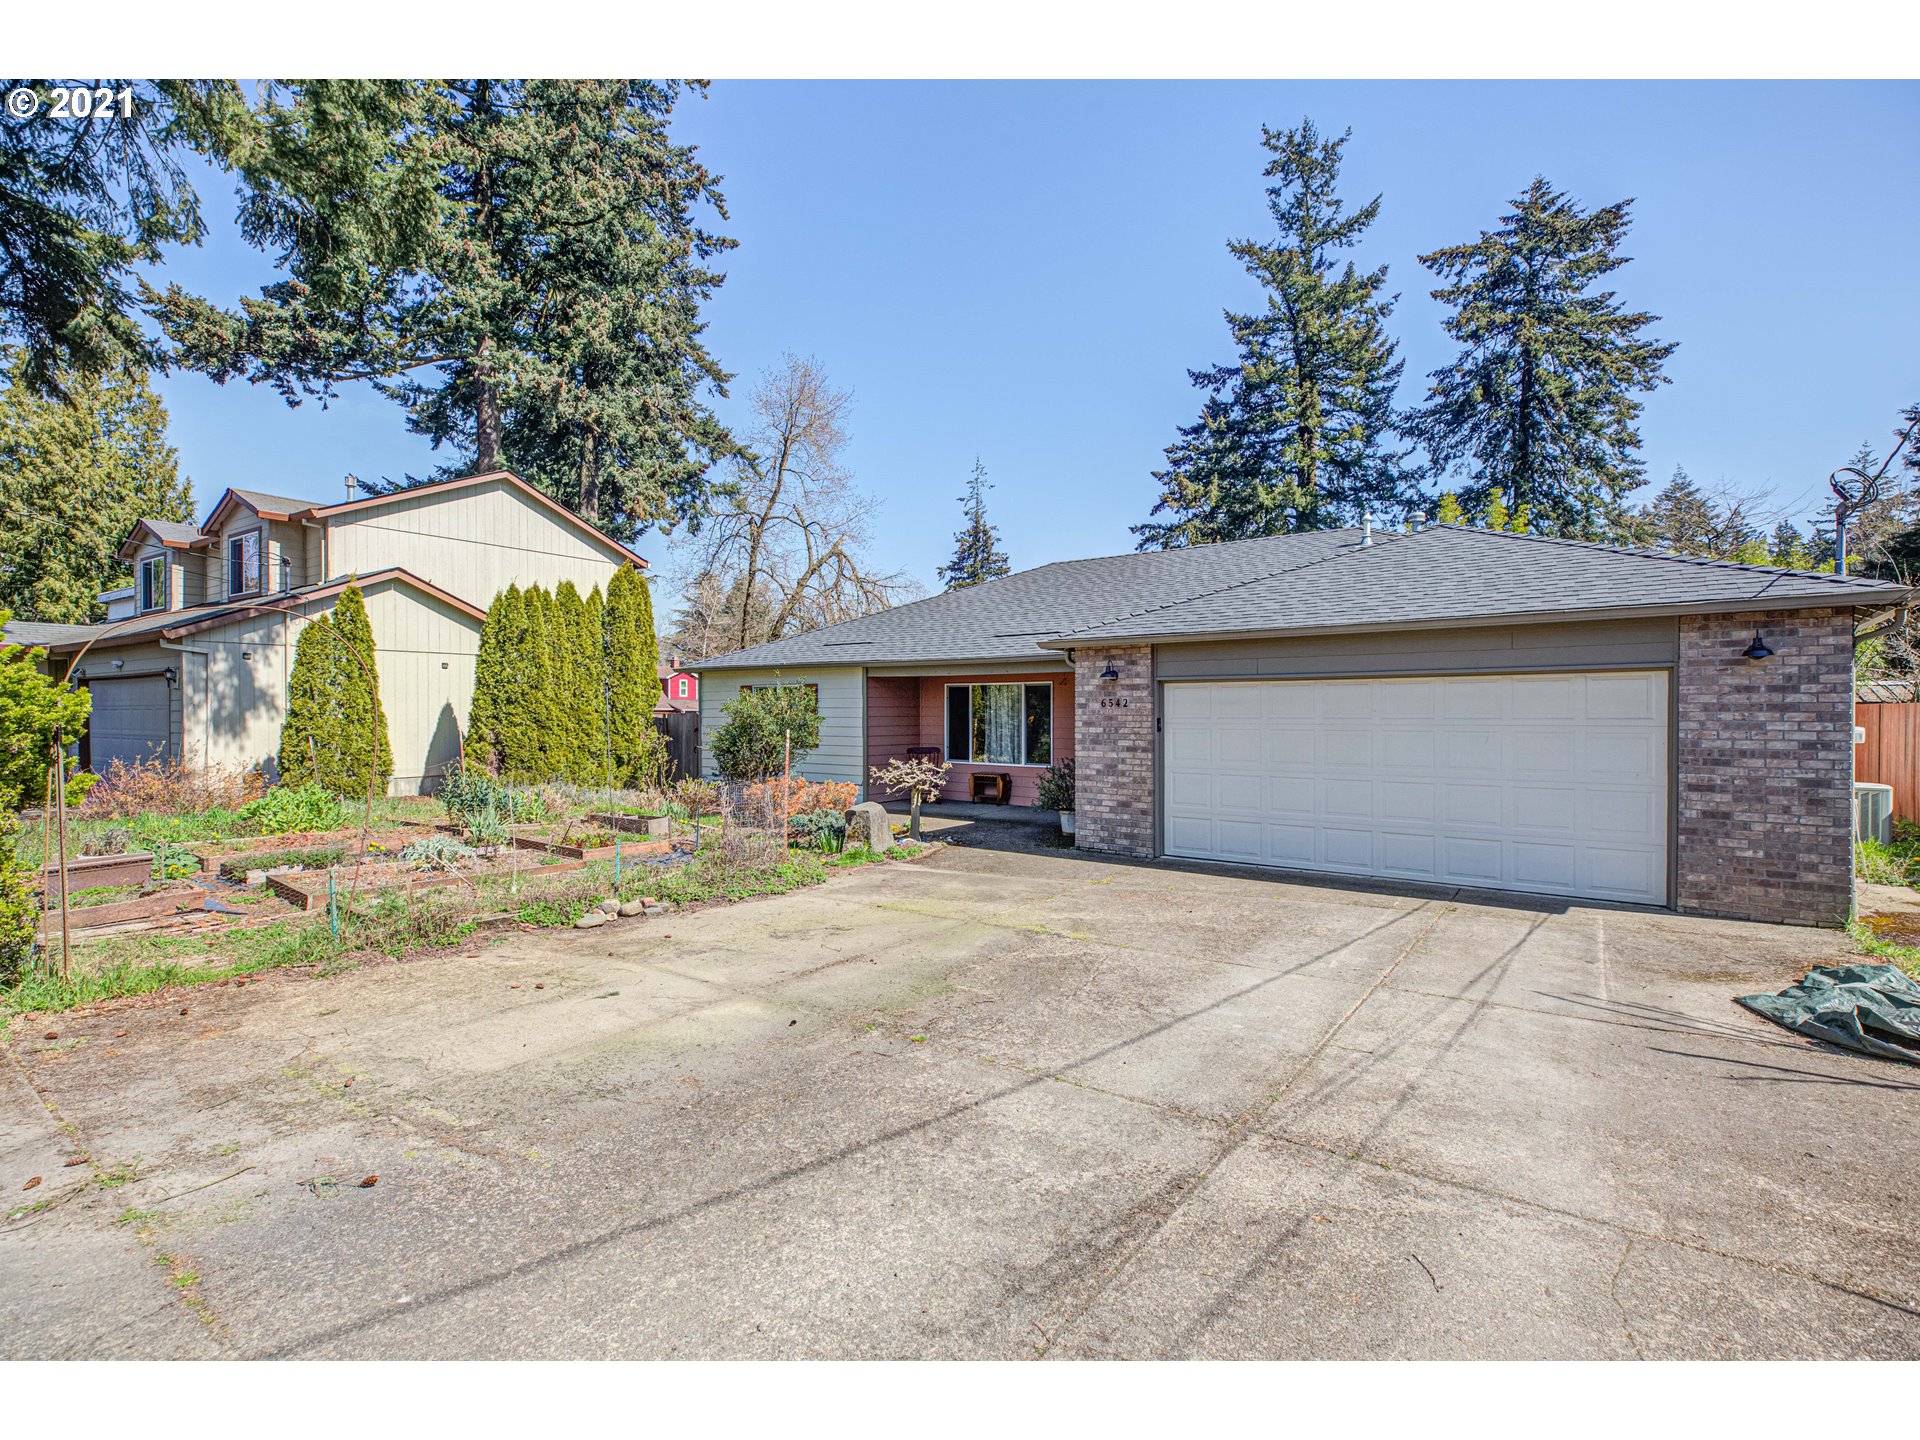 6542 SE 50TH AVE (1 of 27)